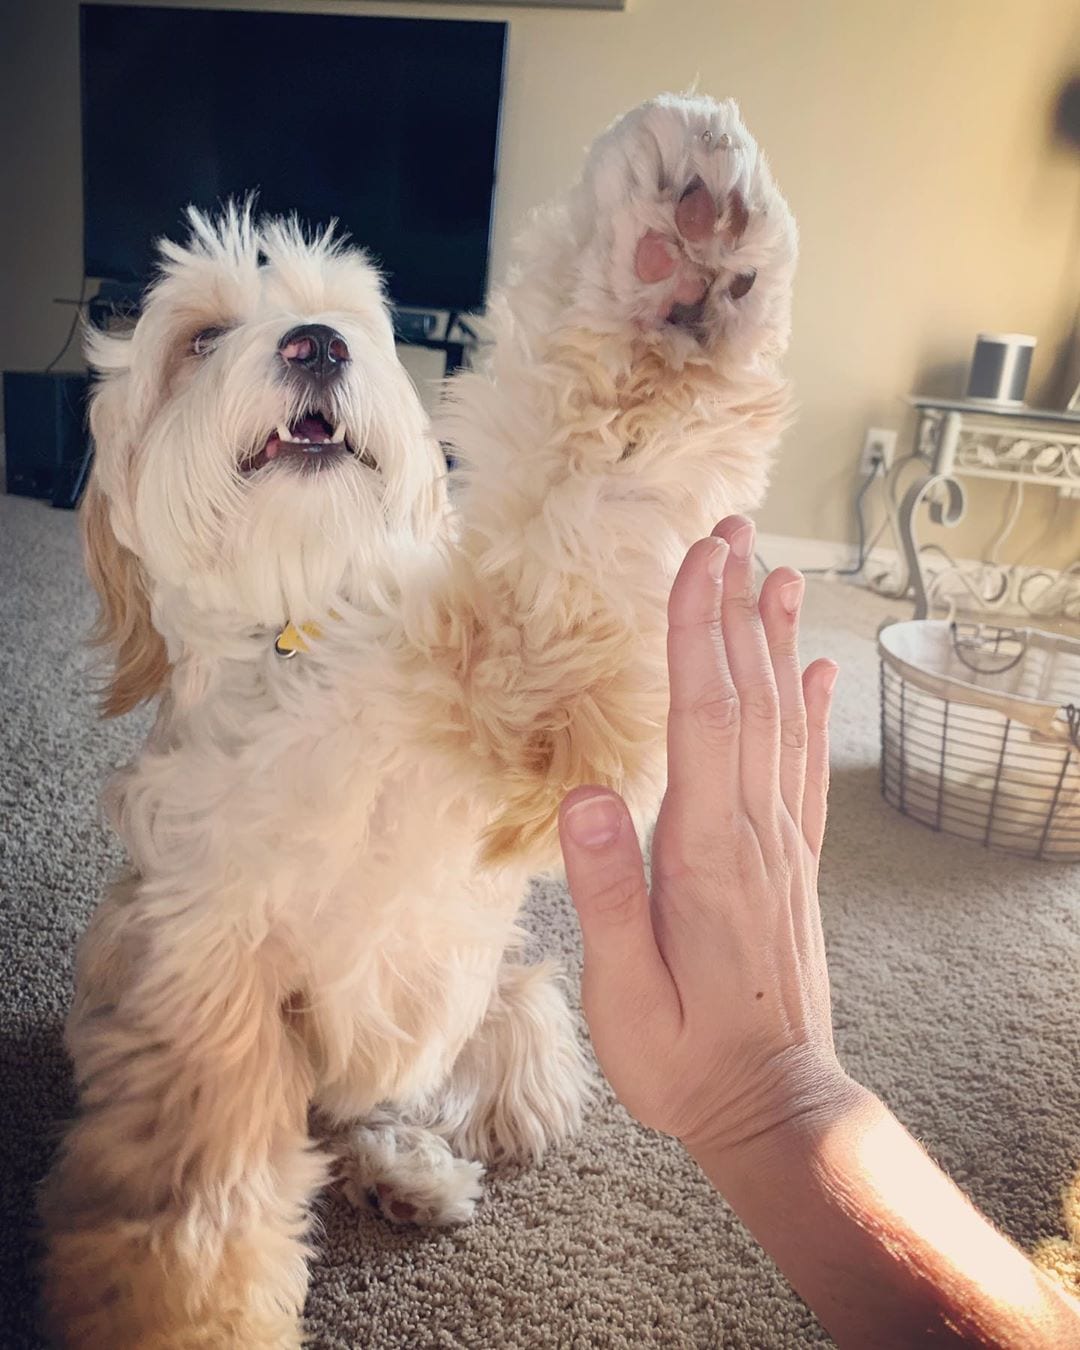 A Tibetan Terrier sitting on the floor while giving a paw towards the hand of the woman in front of him